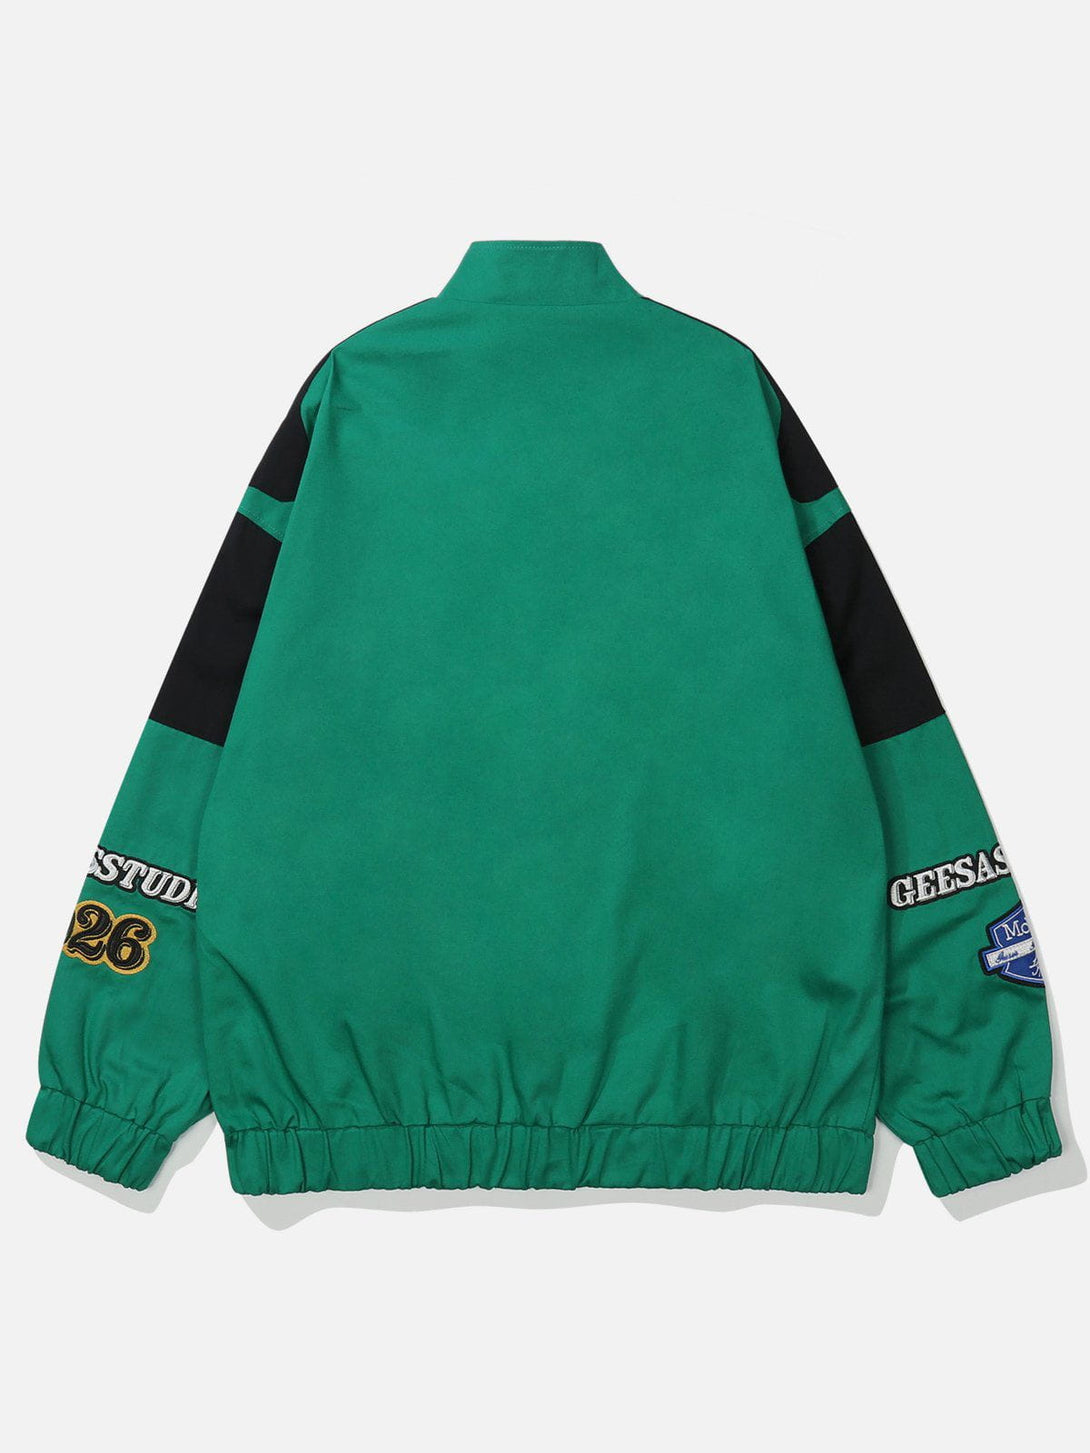 Majesda® - Rugby Letter Embroidery Jacket outfit ideas, streetwear fashion - majesda.com